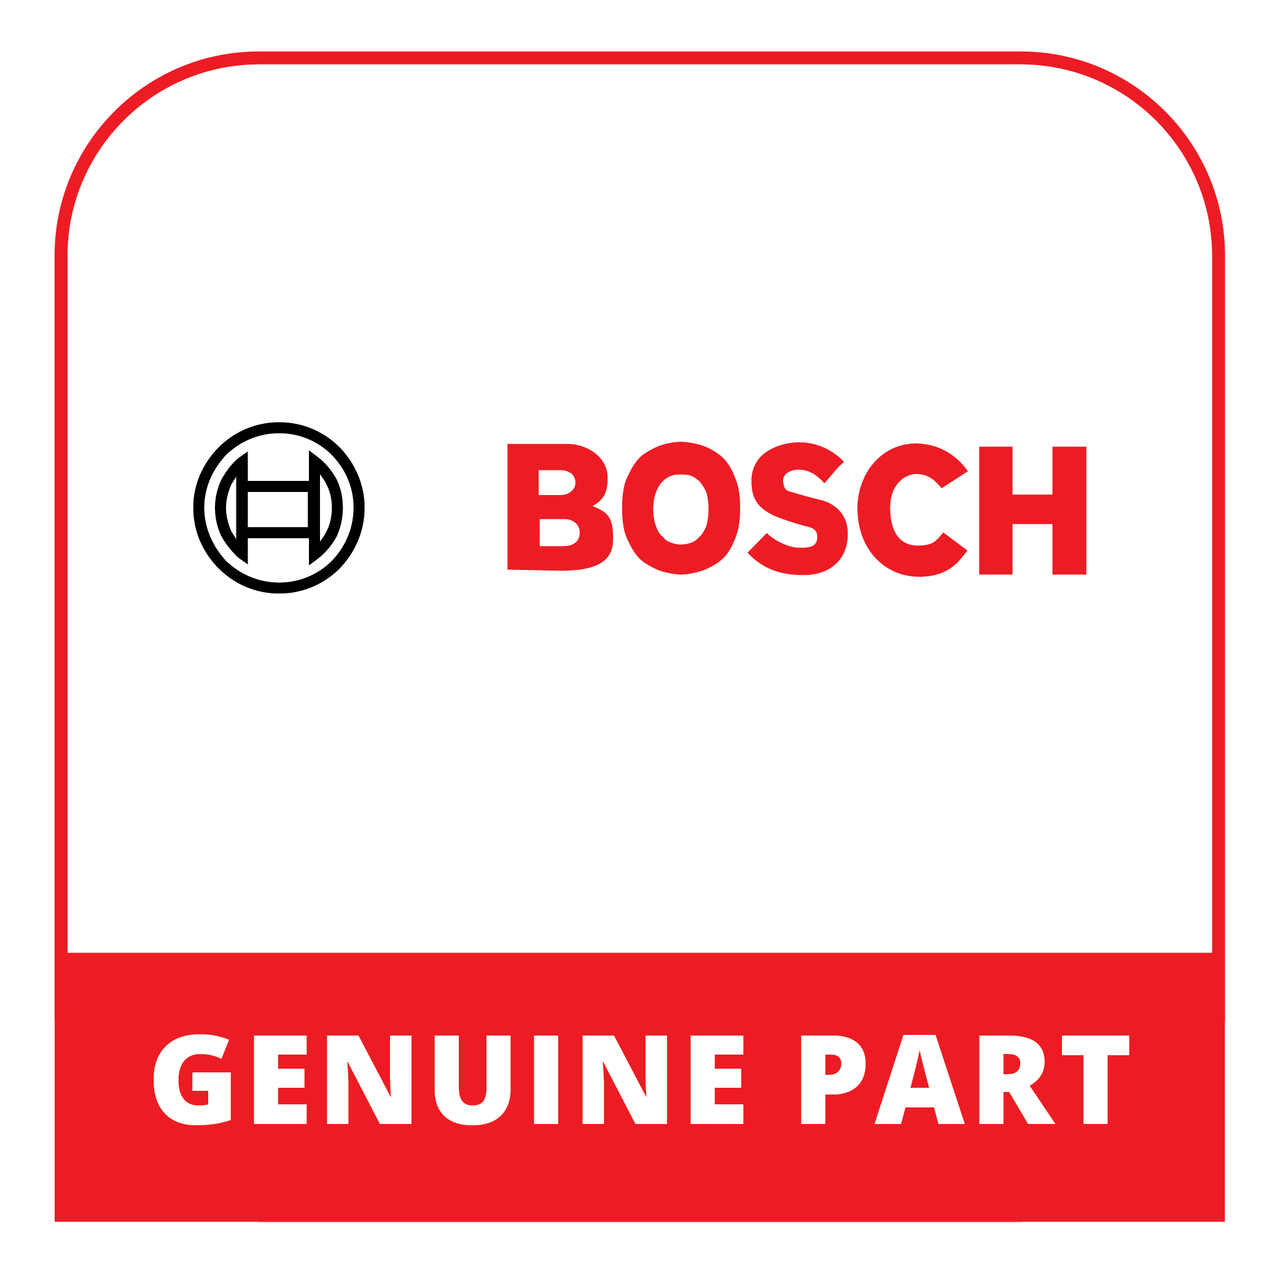 Bosch (Thermador) 20002464 - Cutlery Drawer - Genuine Bosch (Thermador) Part